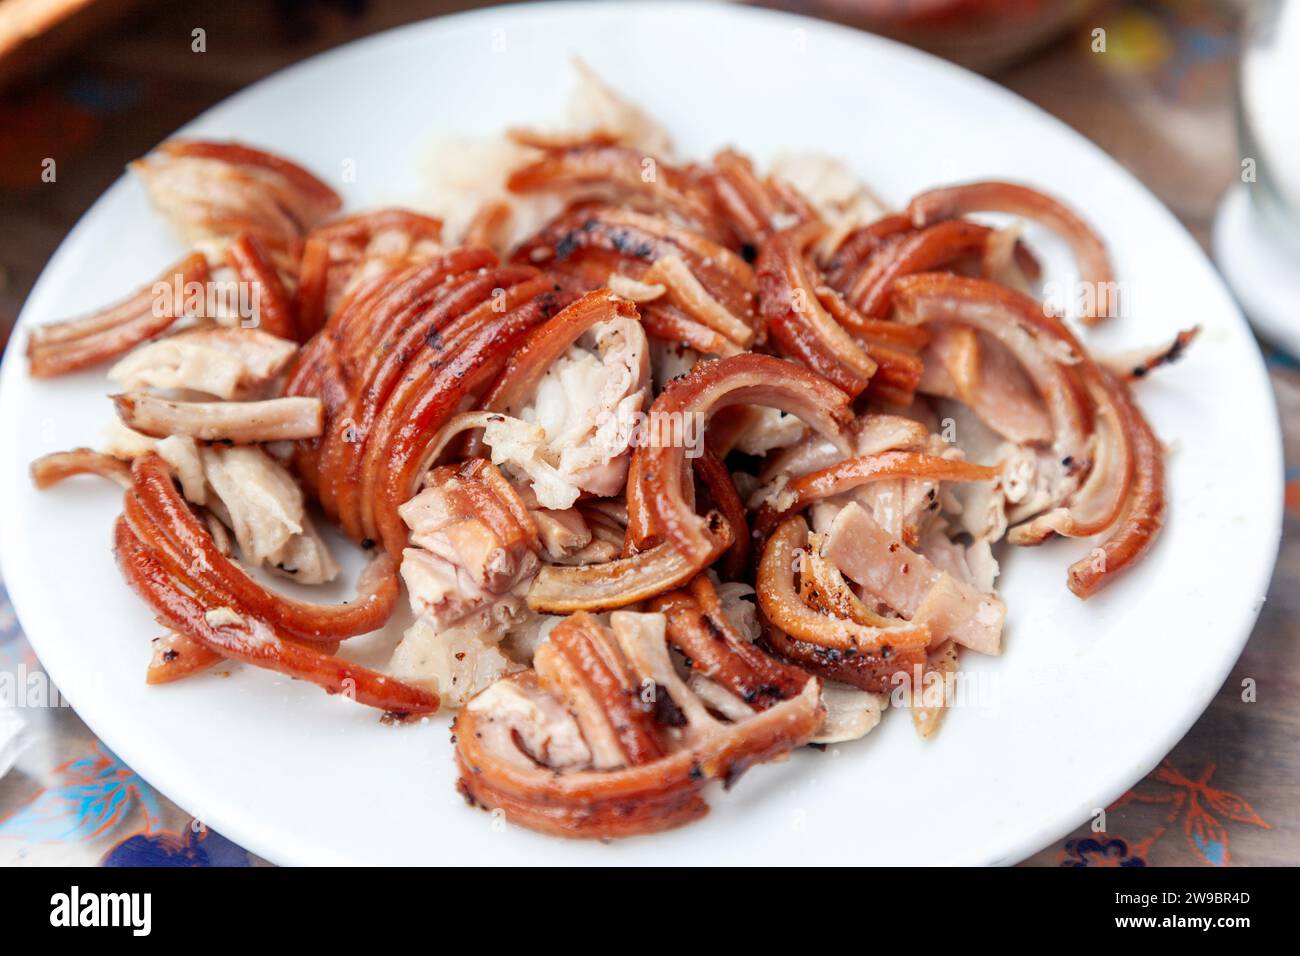 Pieces of kokorec, a popular dish in Turkey, Greece and Balkans, consisting of lamb or goat intestines wrapped around seasoned offal, mostly grilled. Stock Photo